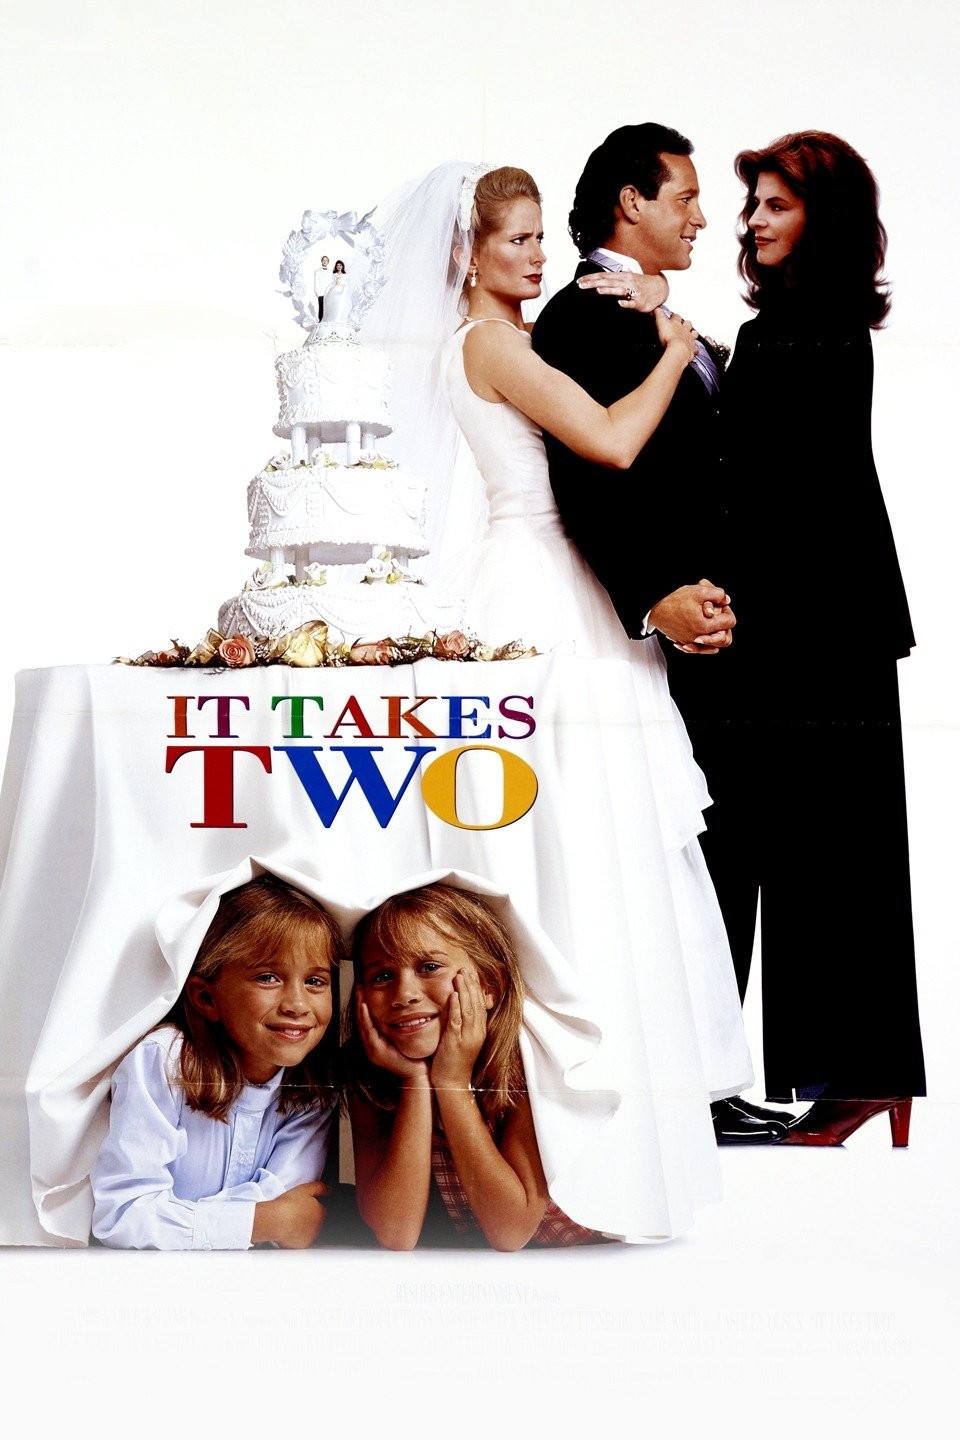 Watch the New It Takes Two Trailer :: It Takes Two Events & Announcements